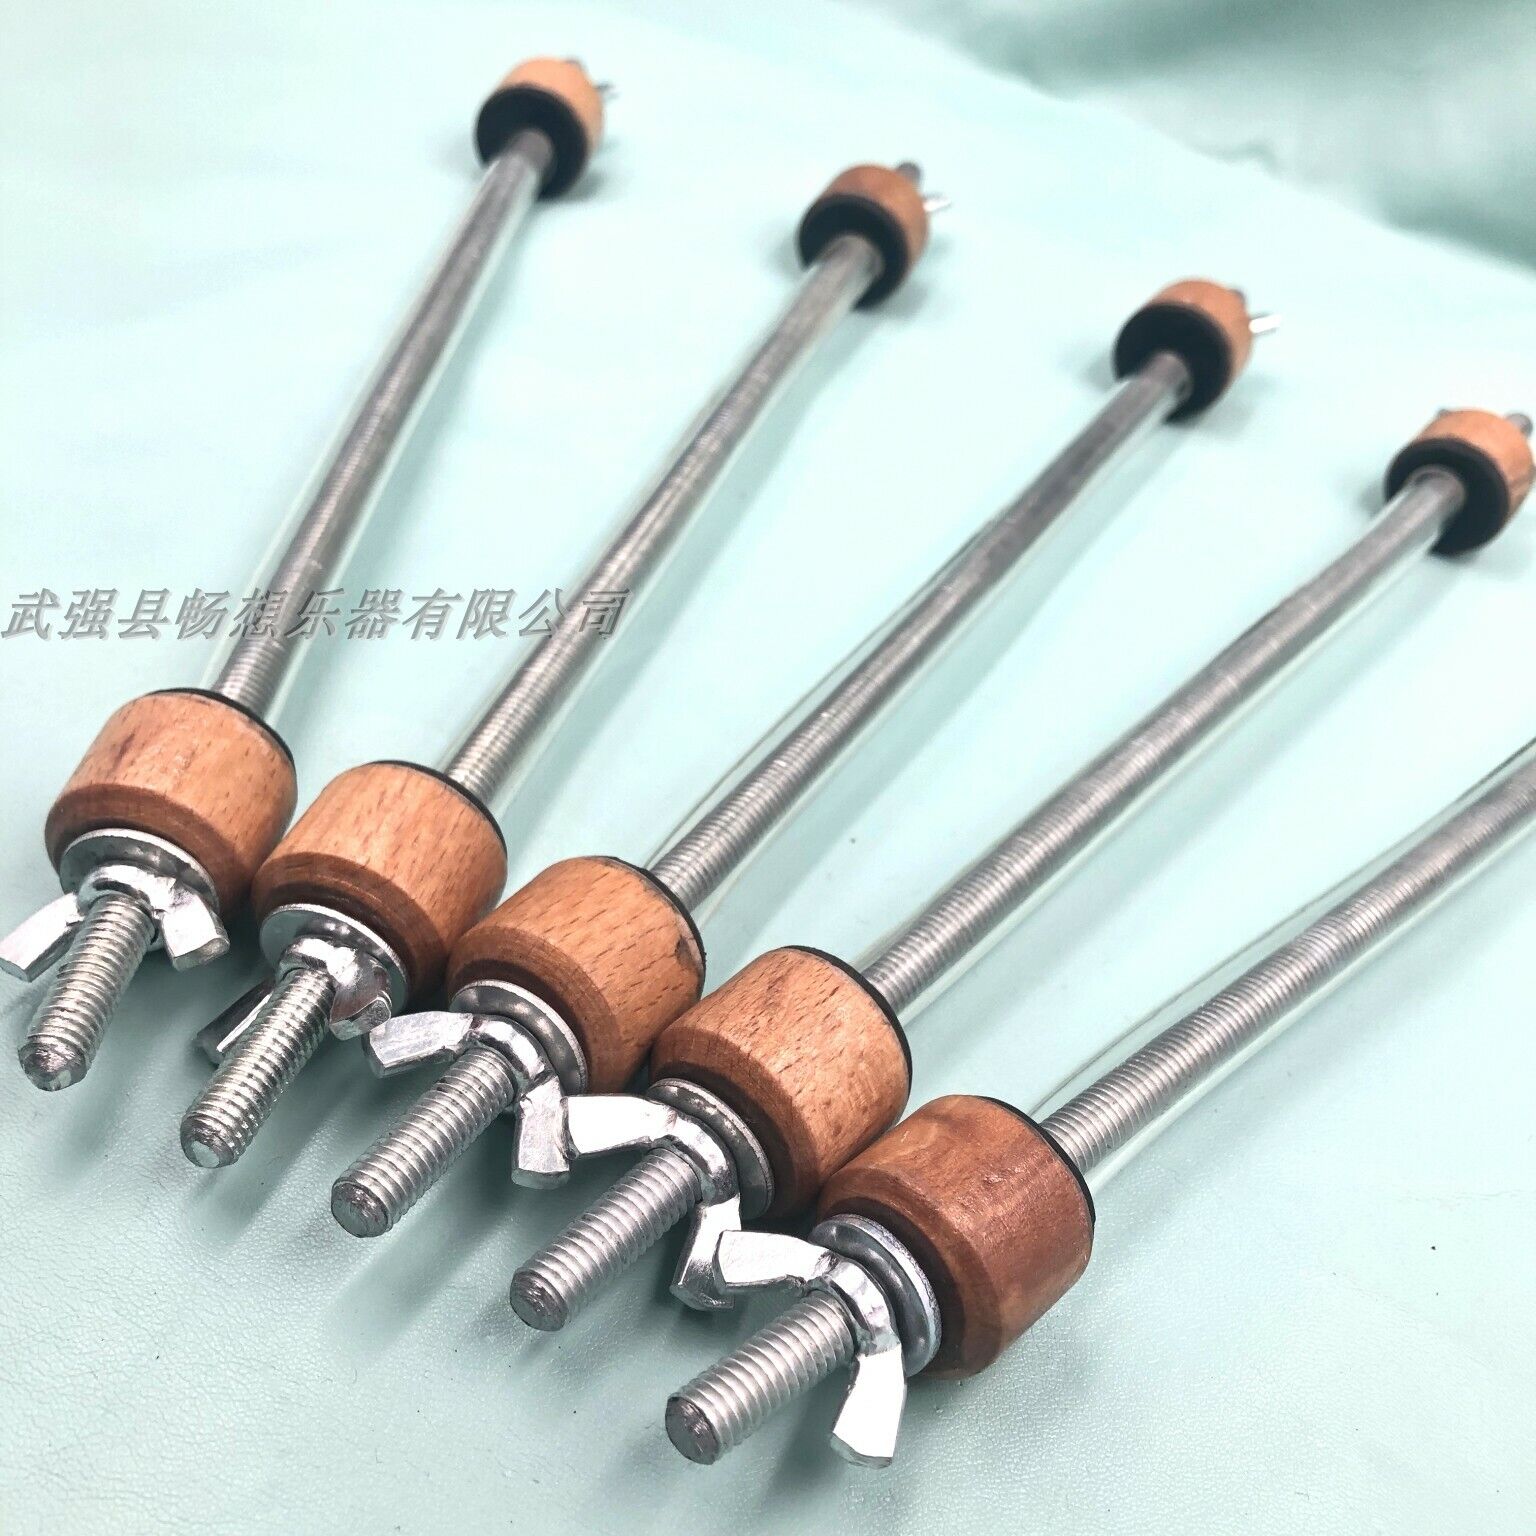 5pcs BASS tool,top and back gluing clamps,musical instrument tool